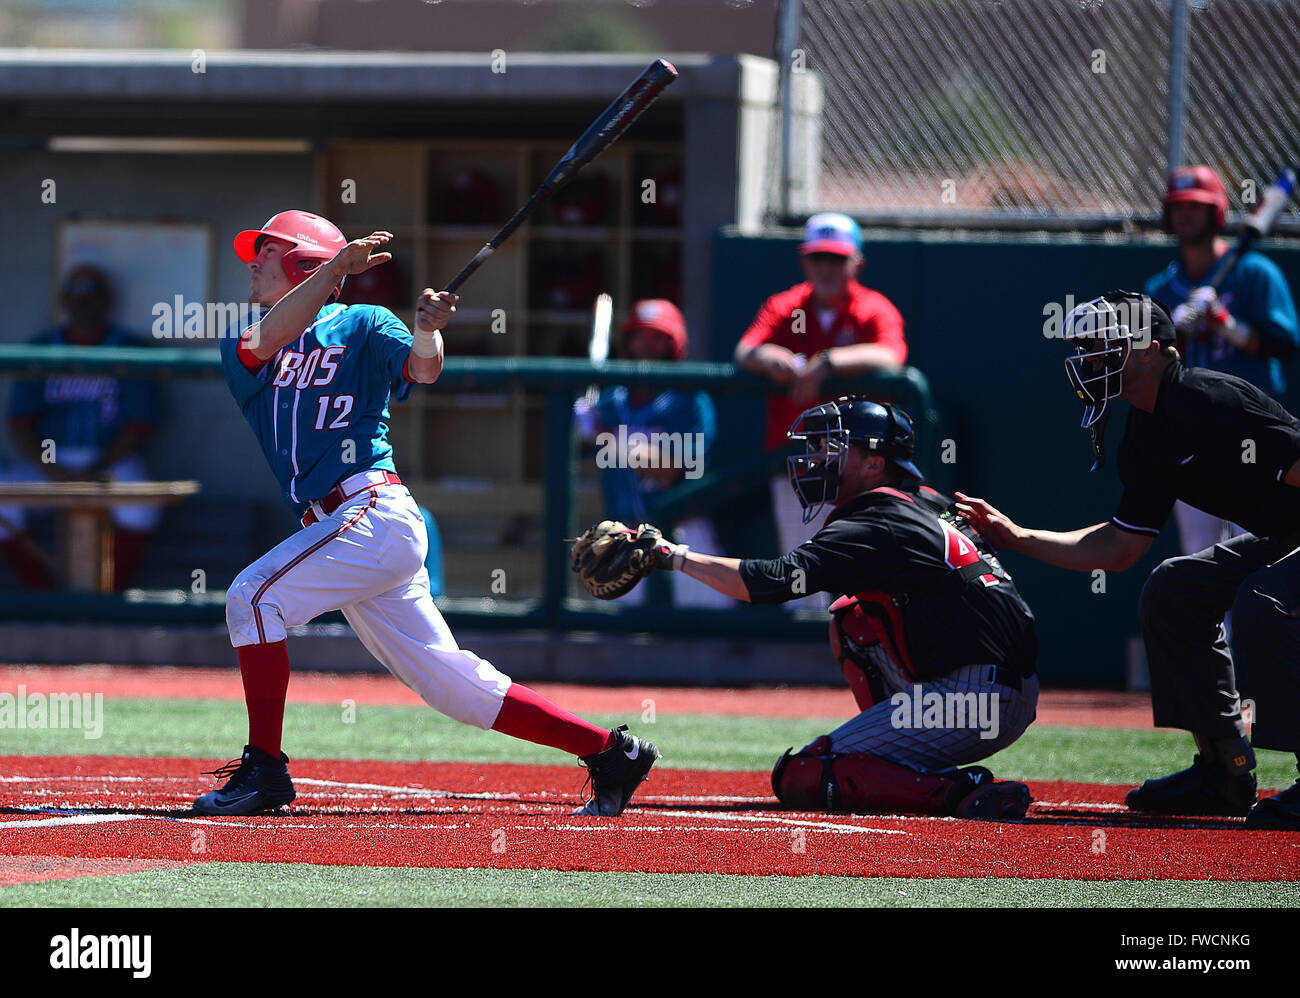 Albuquerque, NEW MEXICO, USA. 3rd Apr, 2016. 040316.UNM infielder Dalton Bowers, left hit a home run against UNLV during the game played at Lobo Stadium.Photographed on Sunday April 3, 2016. Adolphe Pierre-Louis/JOURNAL. © Adolphe Pierre-Louis/Albuquerque Journal/ZUMA Wire/Alamy Live News Stock Photo